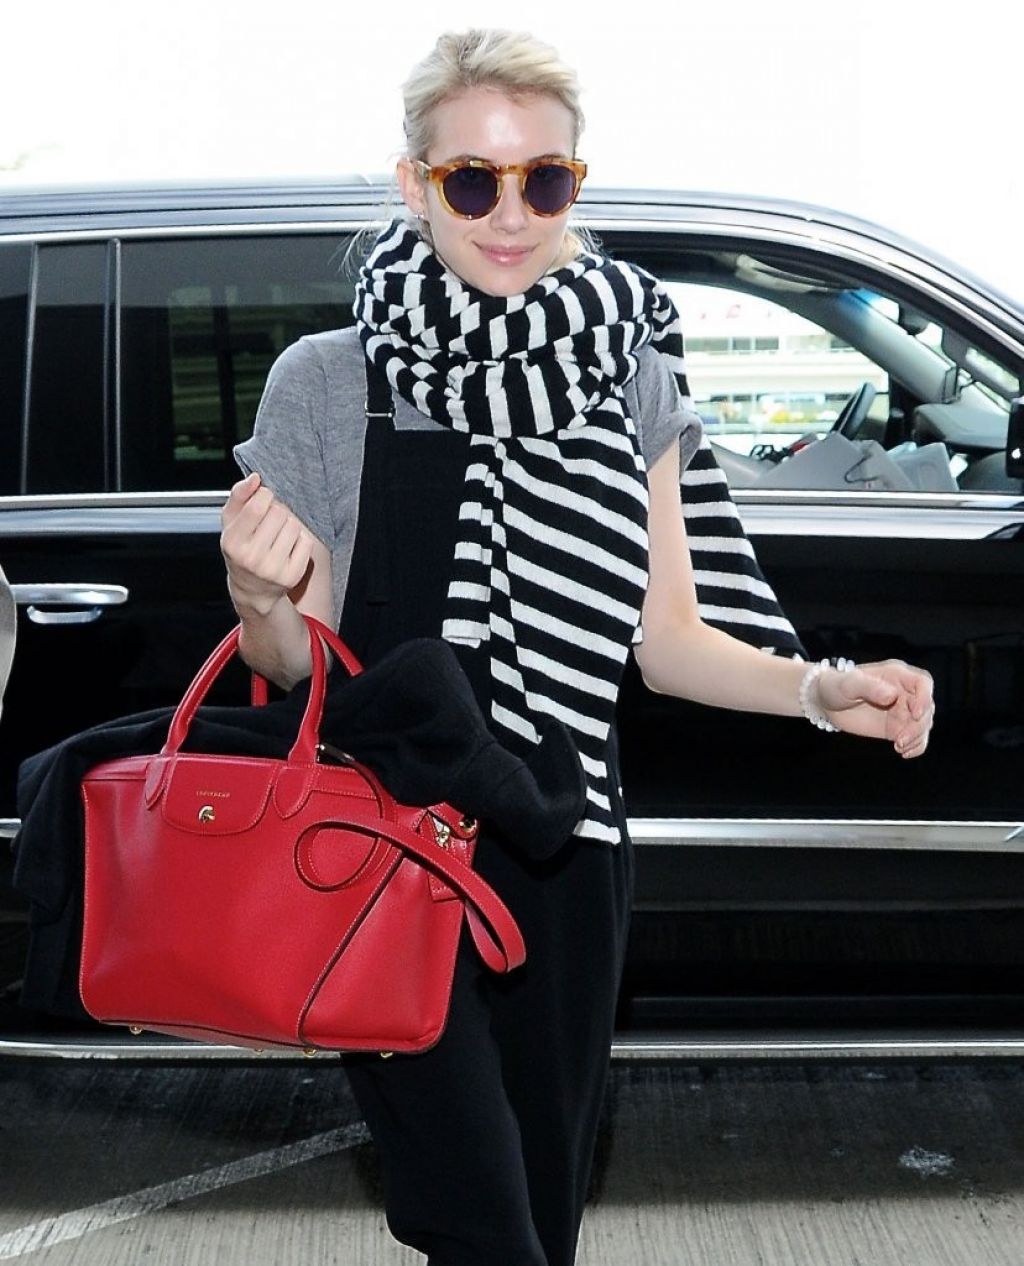 Emma Roberts LAX Airport February 28, 2017 – Star Style